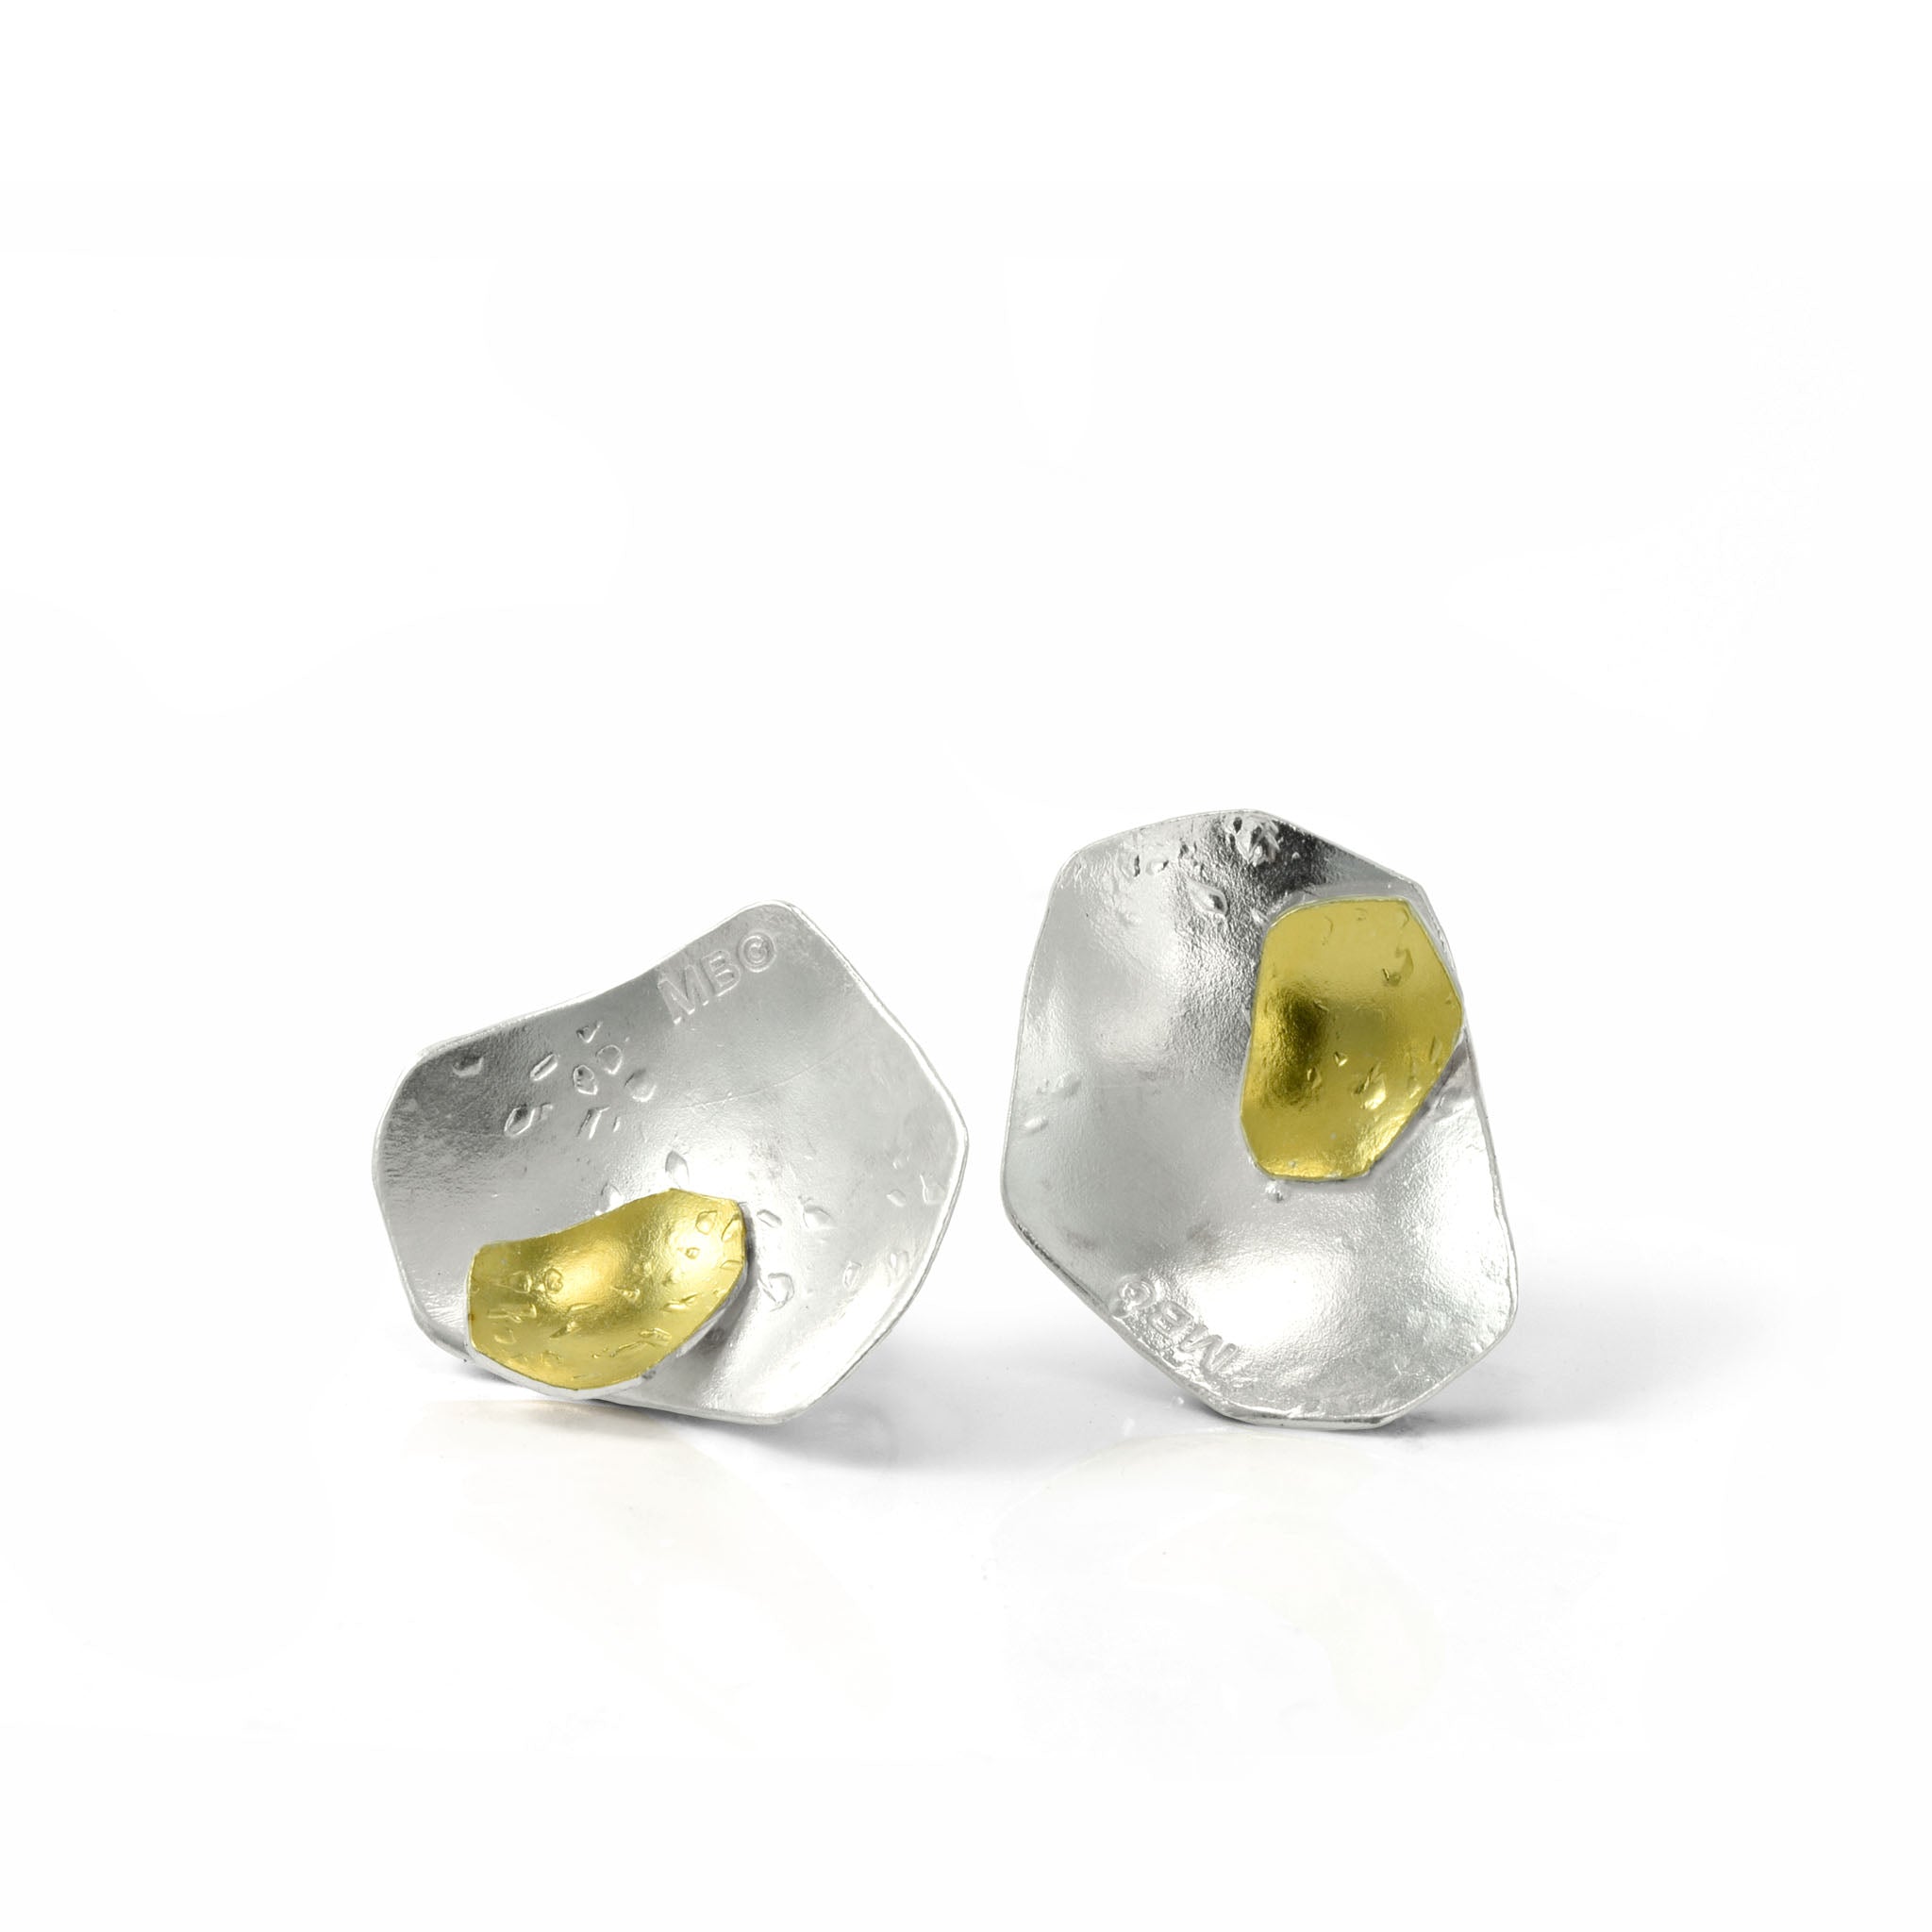 Specks of Sun Silver and gold Post Earrings by maria blondet jewelry 